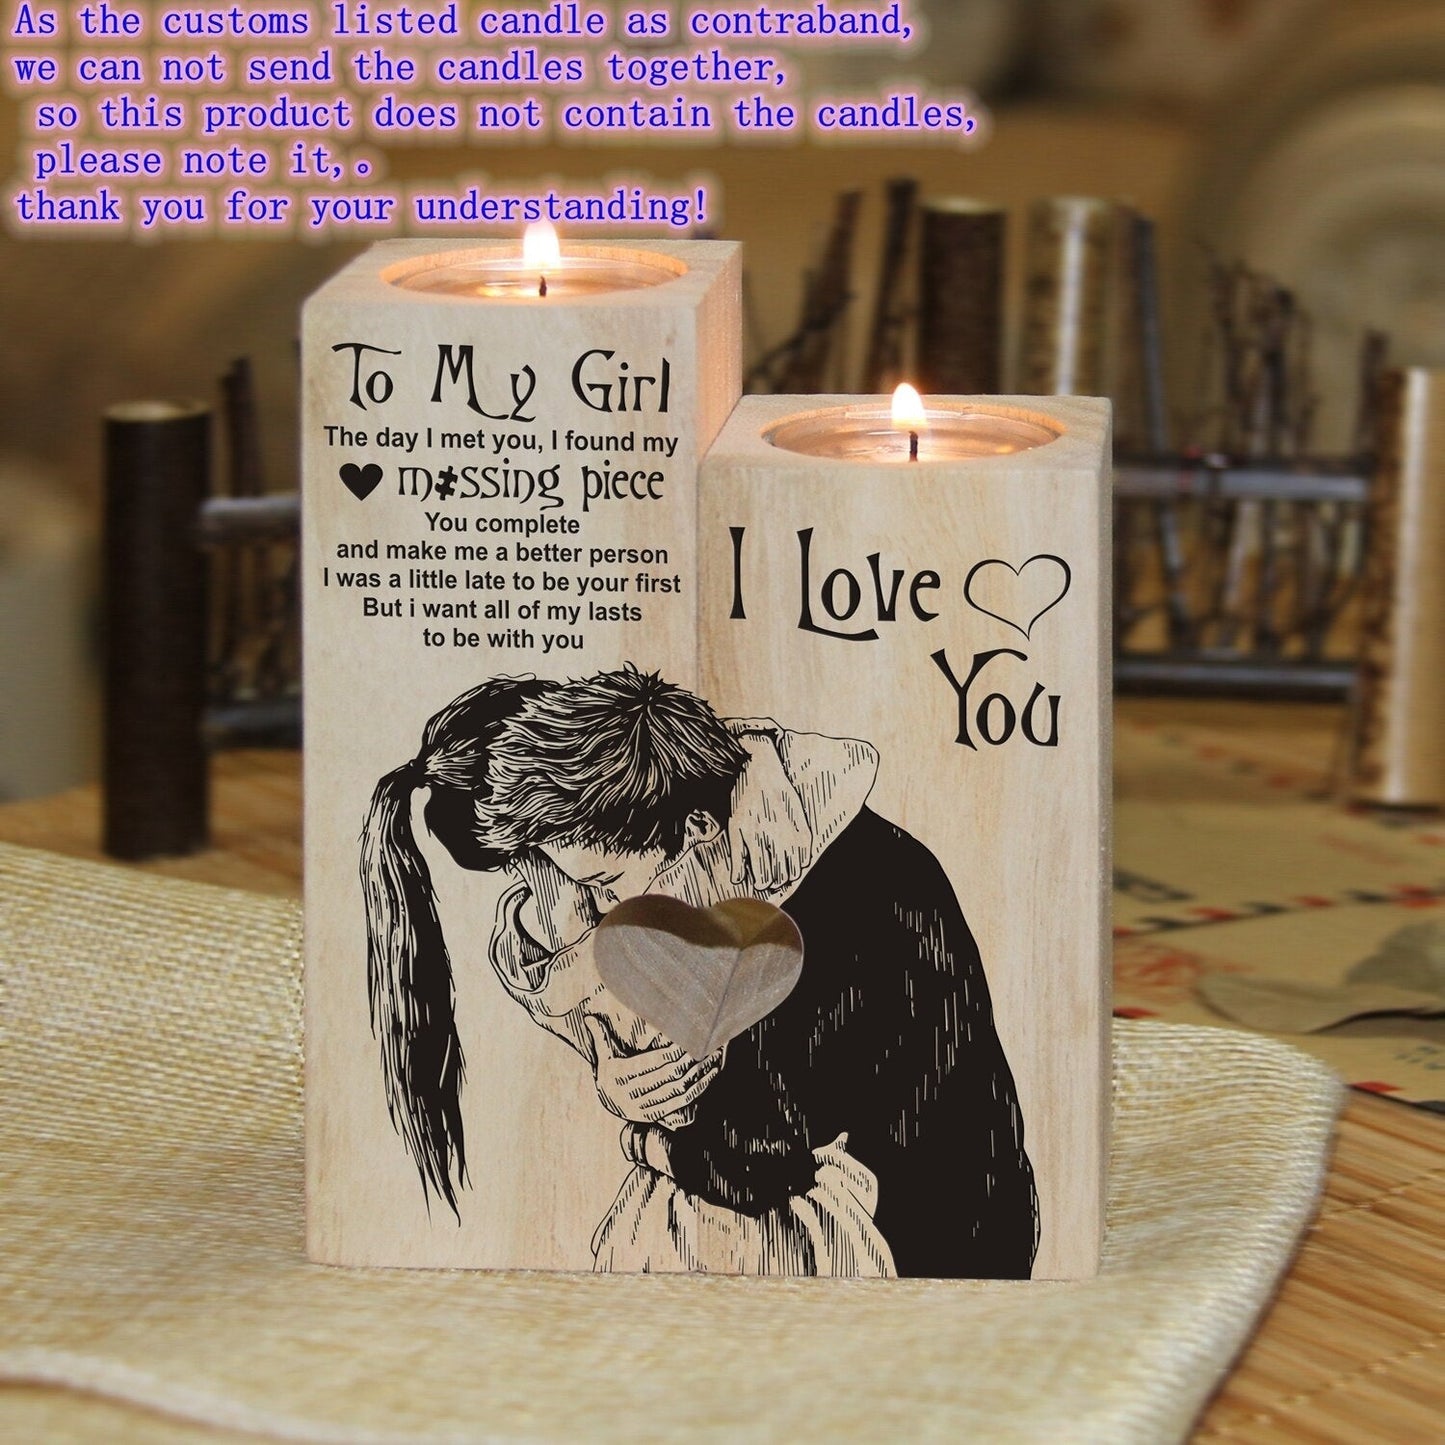 To my girl - Love Candle Holder